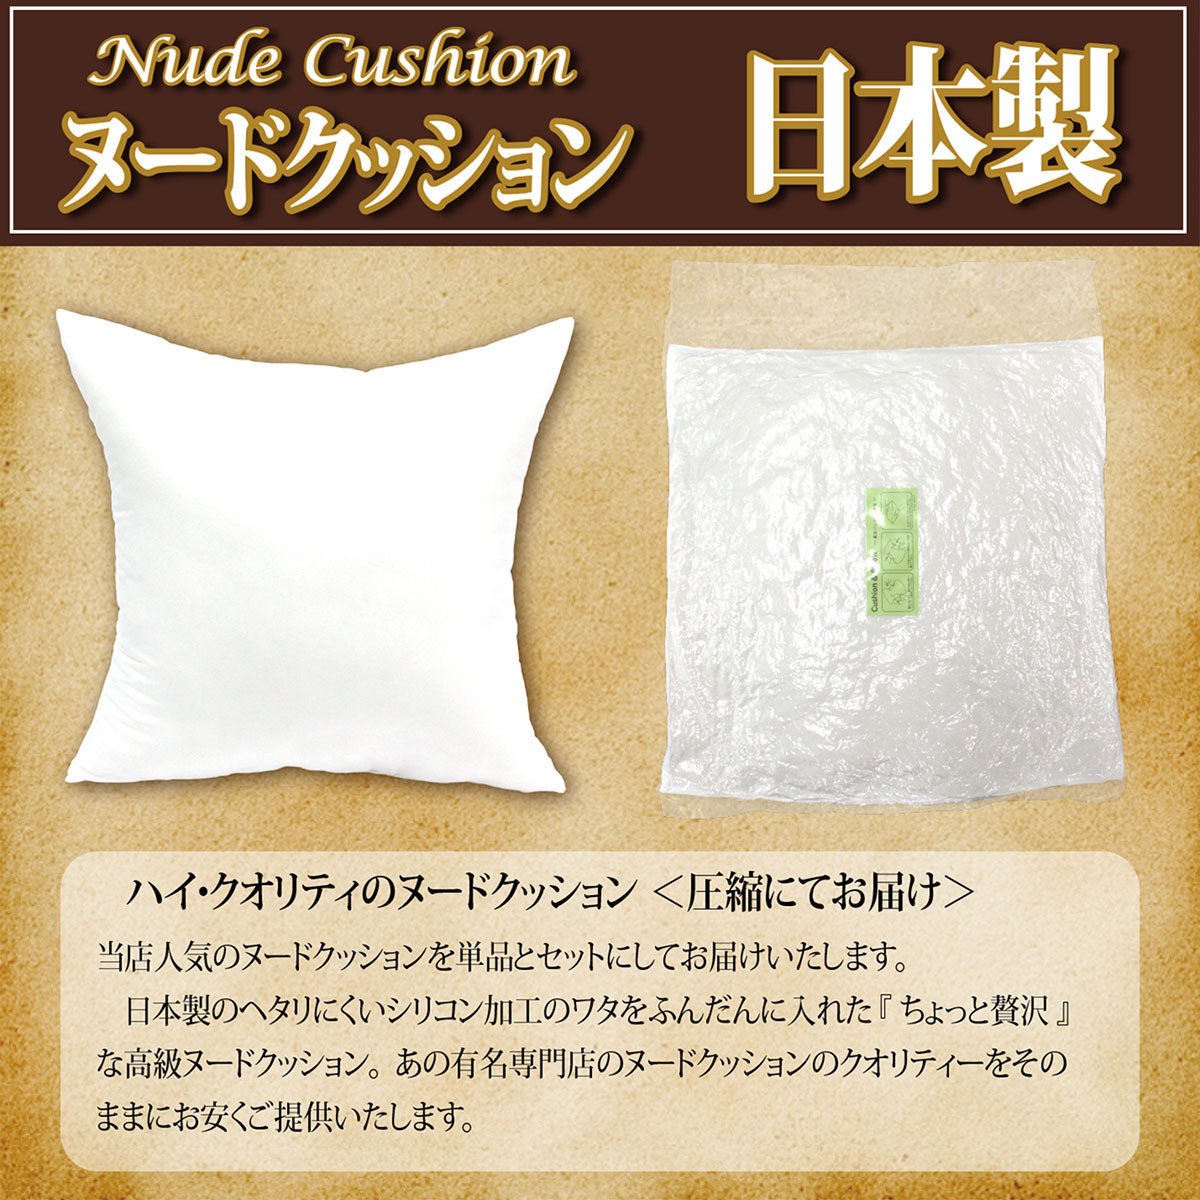  nude cushion 2 piece set square 60×60cm made in Japan cushion contents small of the back cushion cushion BODY pillowcase ... pillow pillow free shipping 